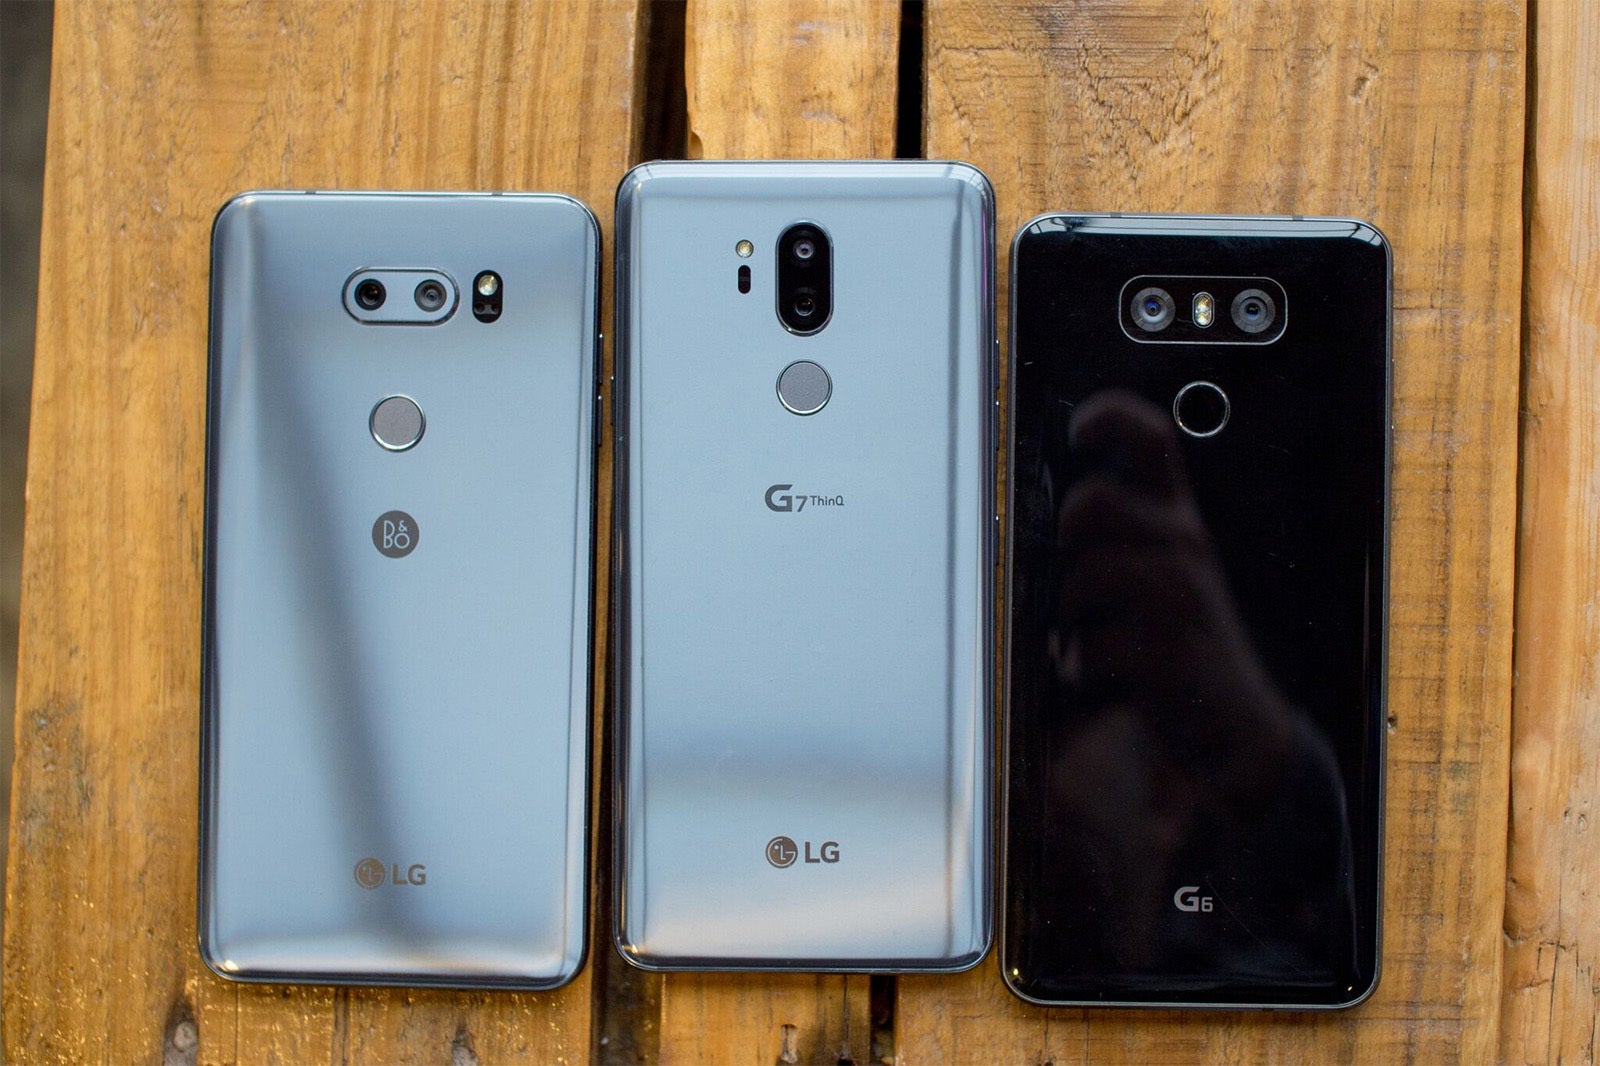 The LG G7 is now official: the latest from Android in one stylish and powerful phone